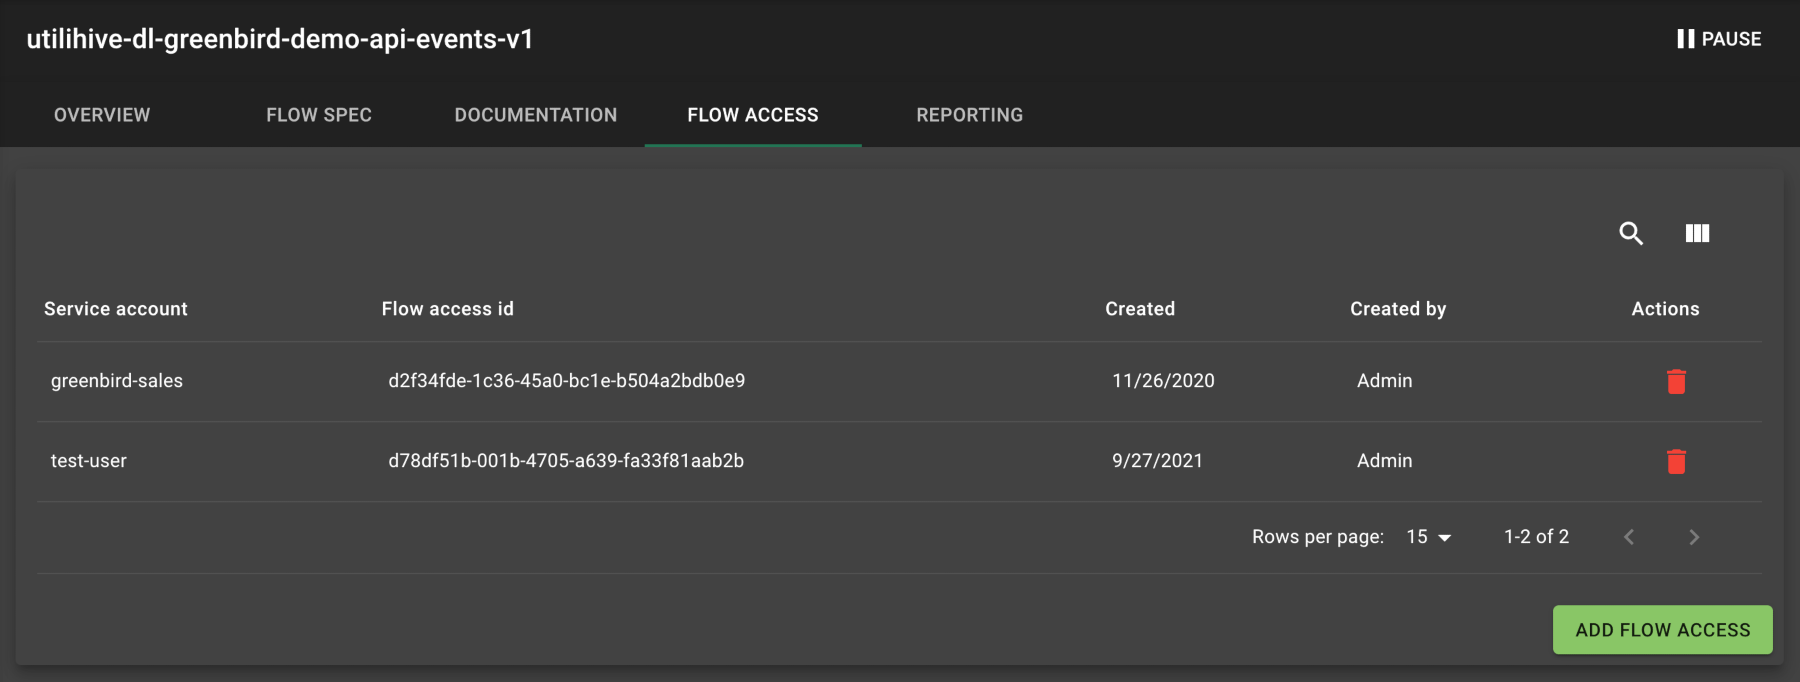 The Flow Access tab displays a list of service accounts with an Add Flow Access button underneath.